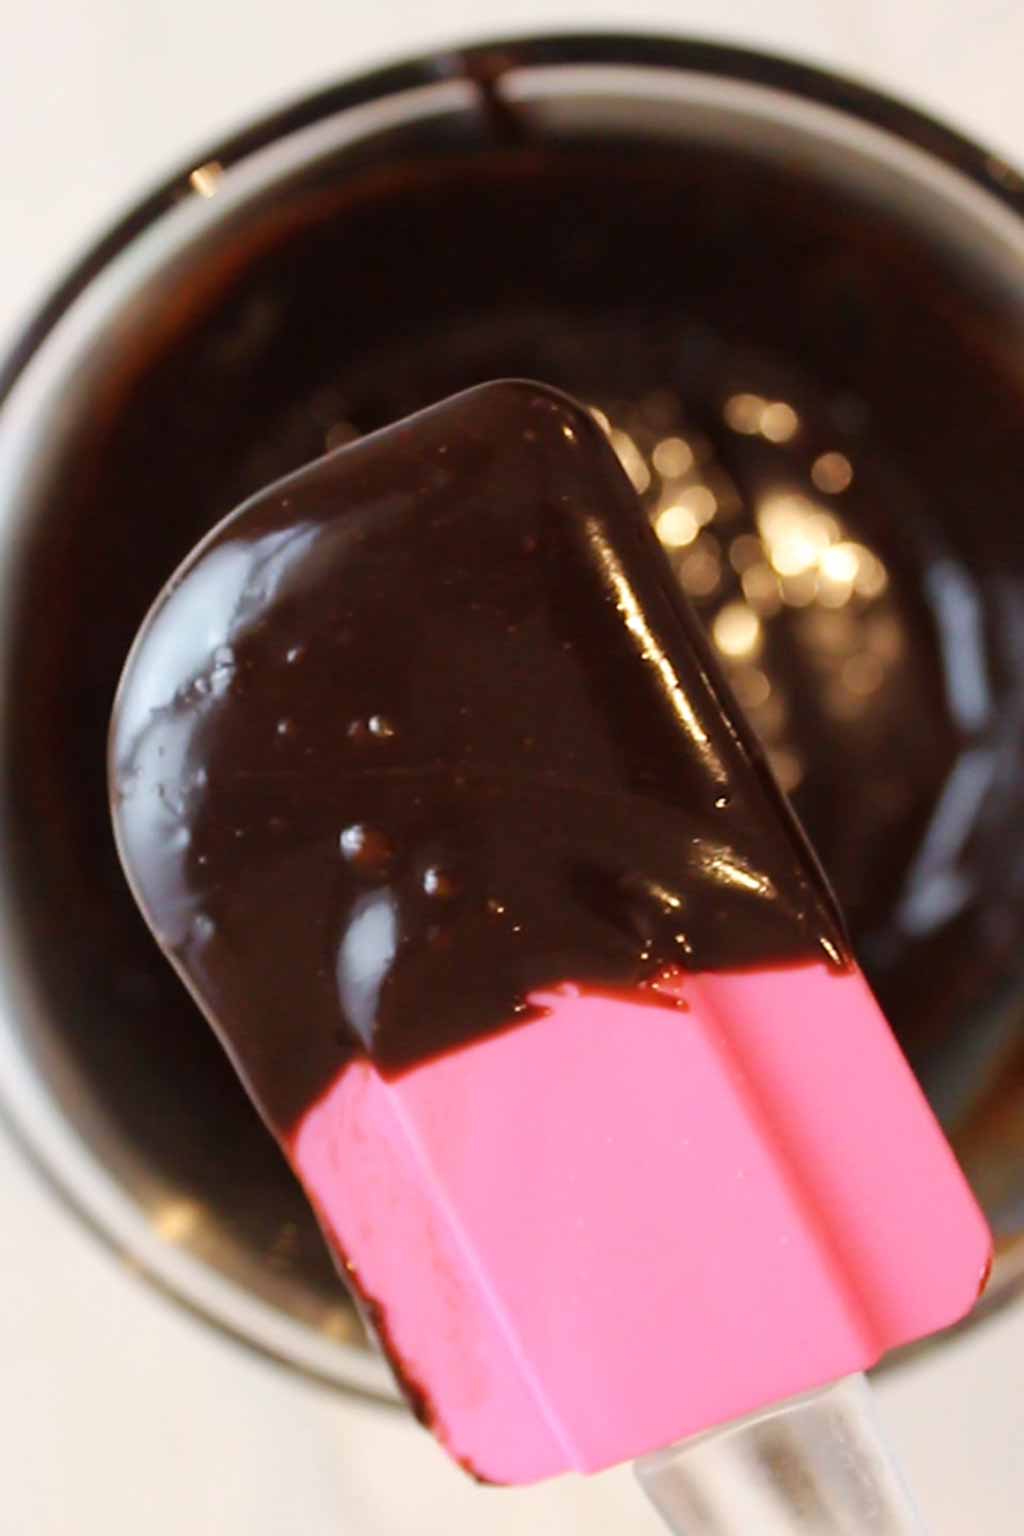 Ganache On The End Of A Pink Spatula